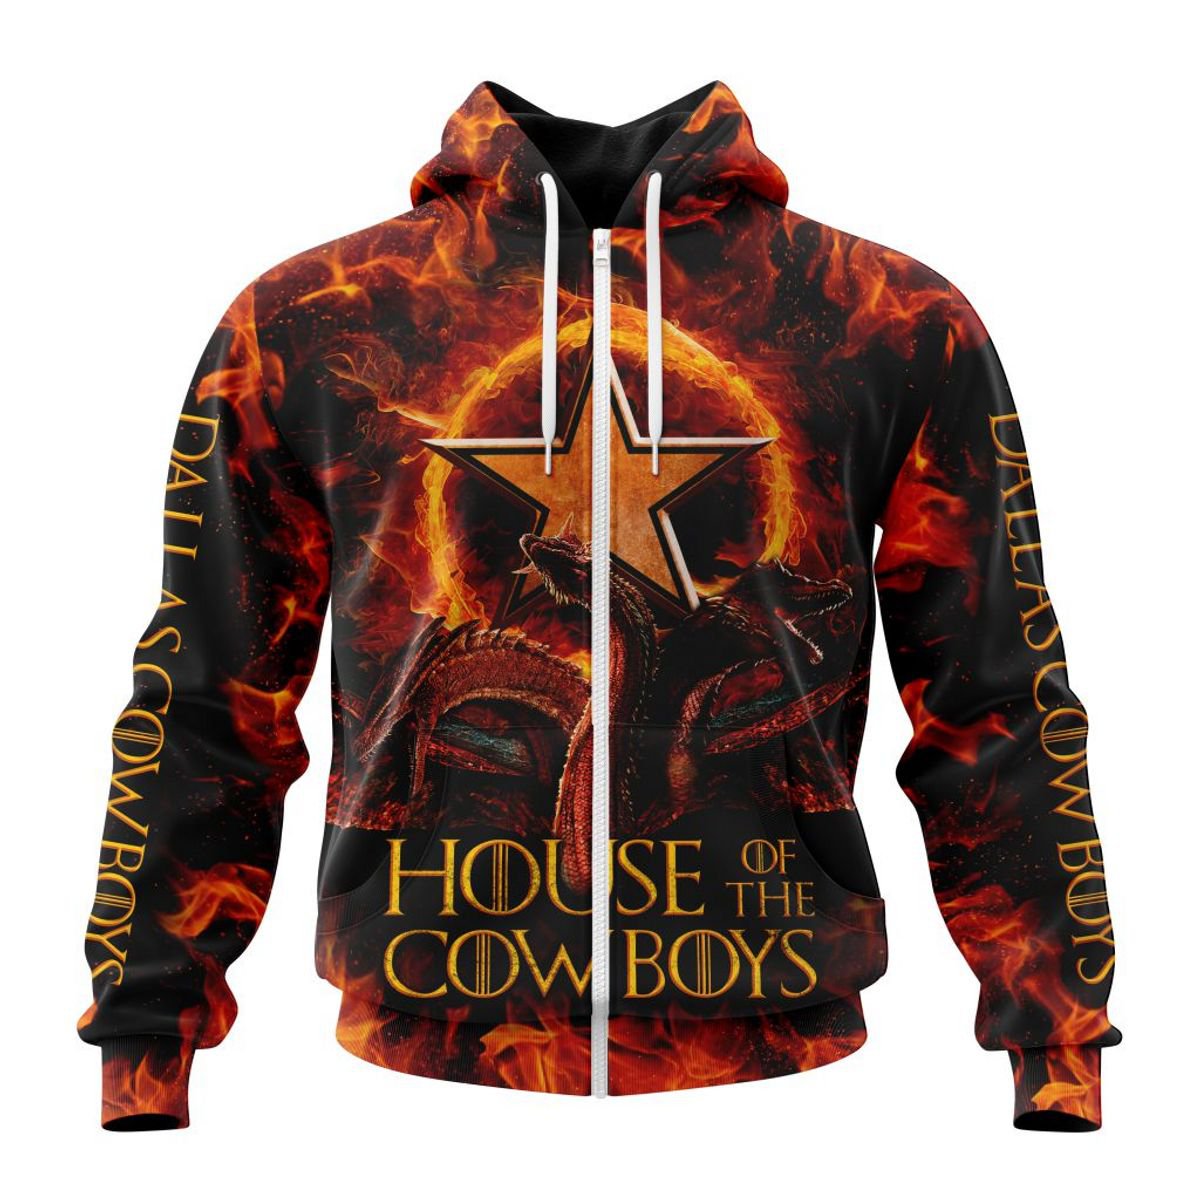 DALLAS COWBOYS GAME OF THRONES – HOUSE OF THE COWBOYS 3D HOODIE